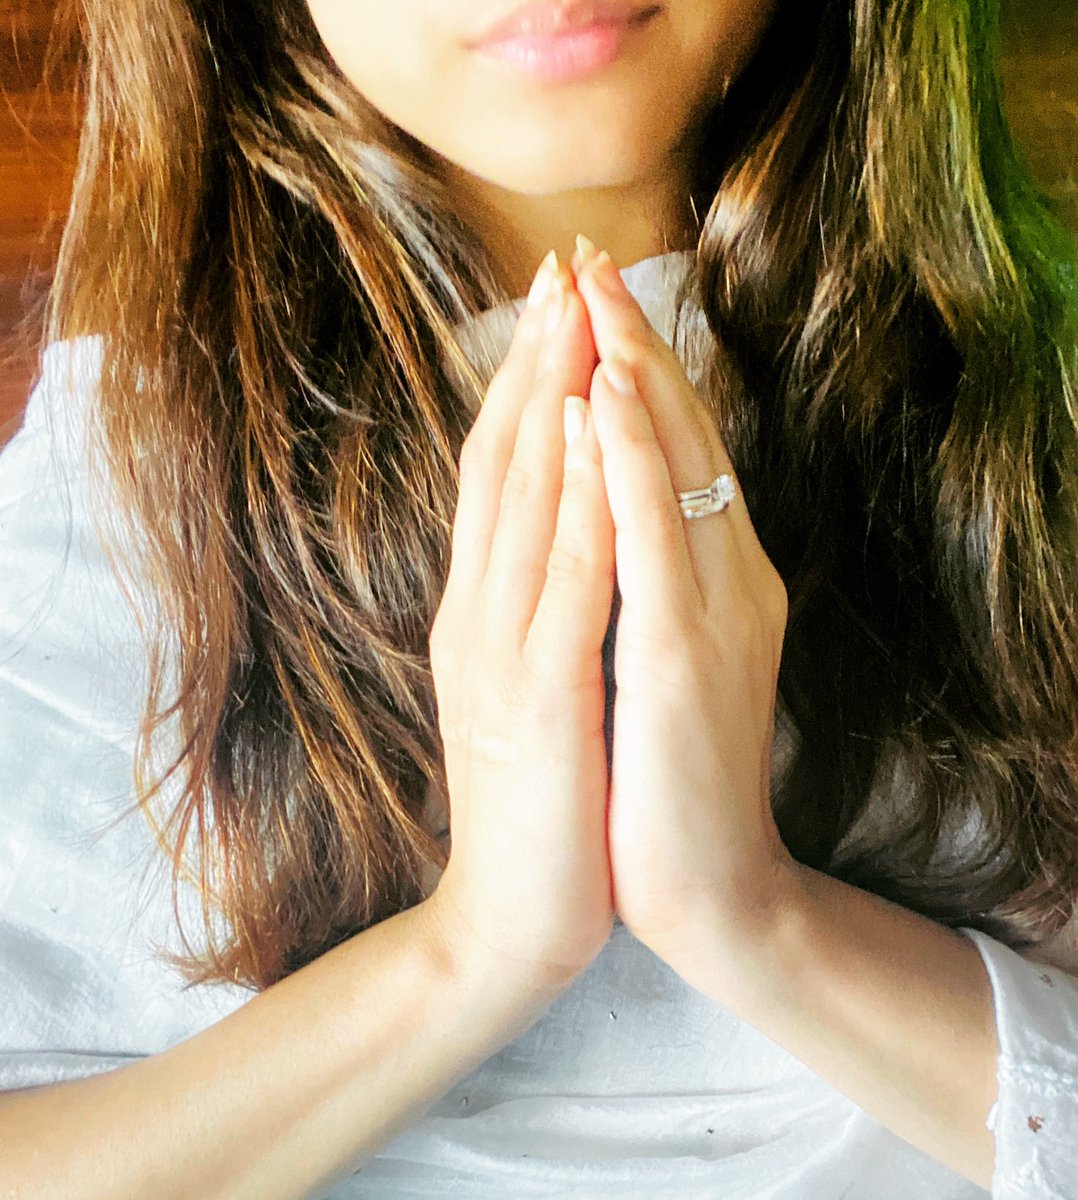 Post a pic of yours with folded hands and join the campaign #GlobalPrayers4SSR at 10 am(IST) on 15th August. Let’s Pray together for truth to shine forth and for God to guide us. #justiceforSushanthSinghRajput #Warriors4SSR #CBIForSSR #GodIsWithUs